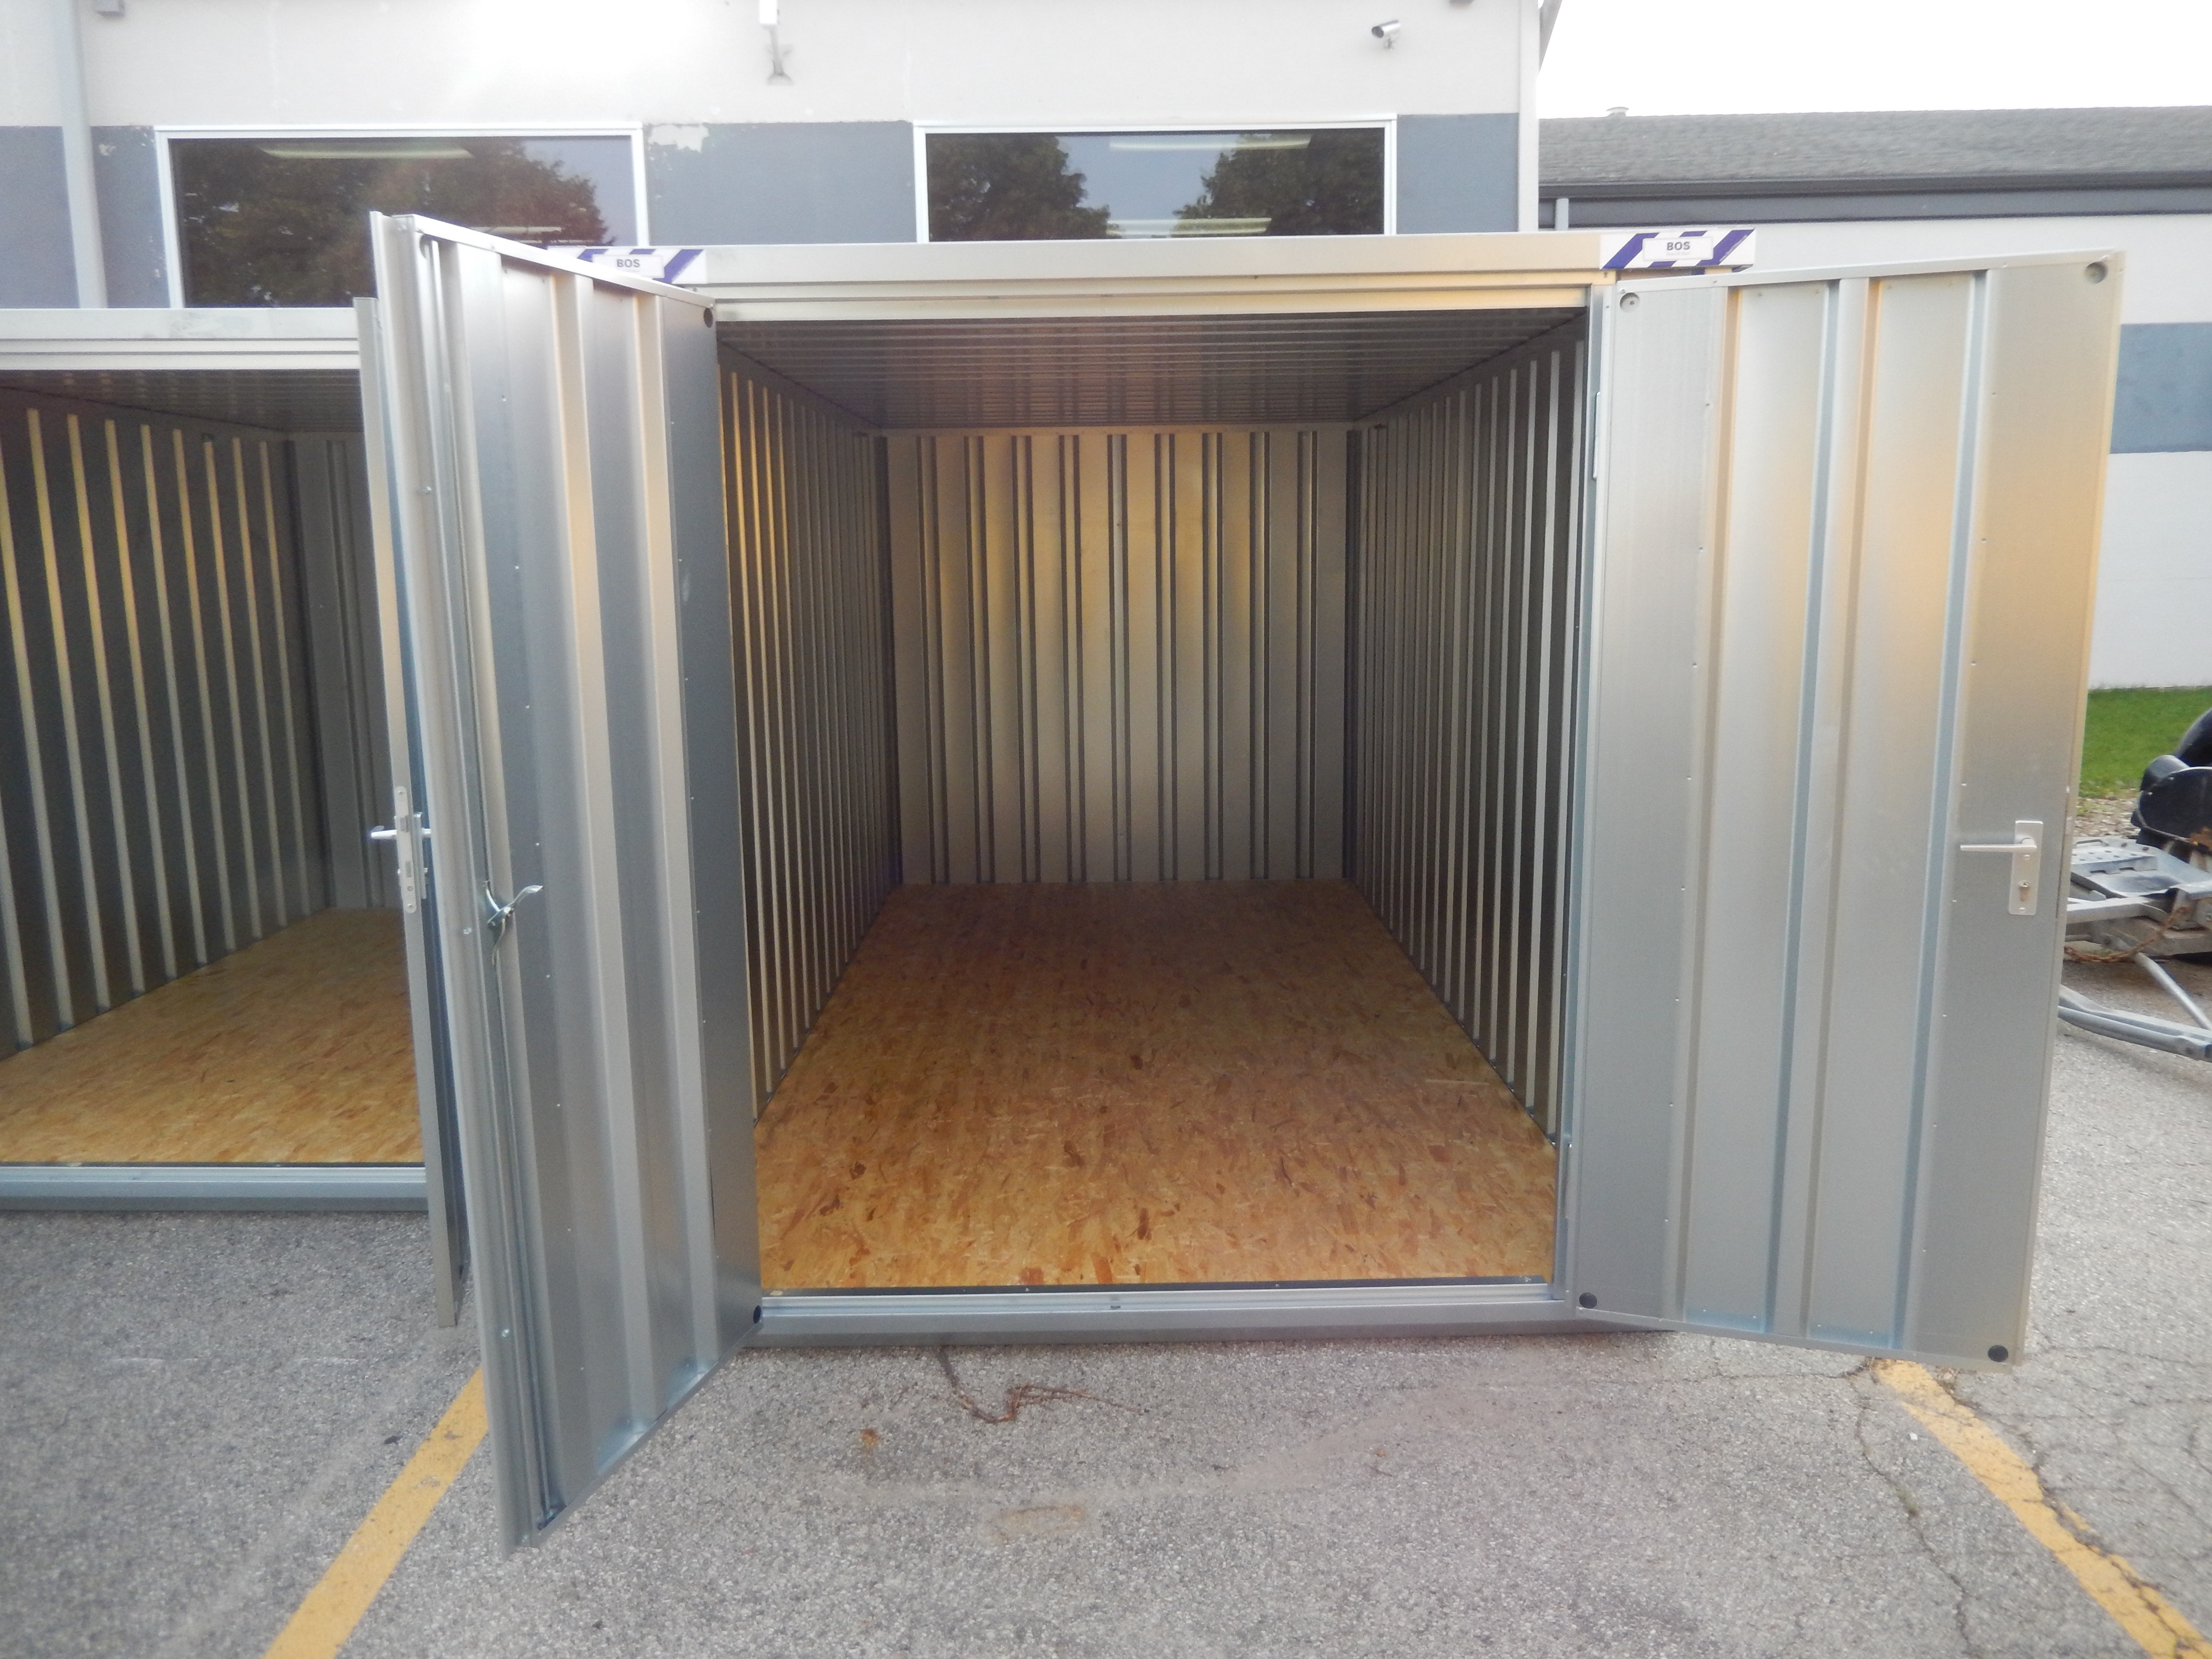 Open Door To Large Portable Temporary Steel Storage Shed Iowa City regarding dimensions 4608 X 3456